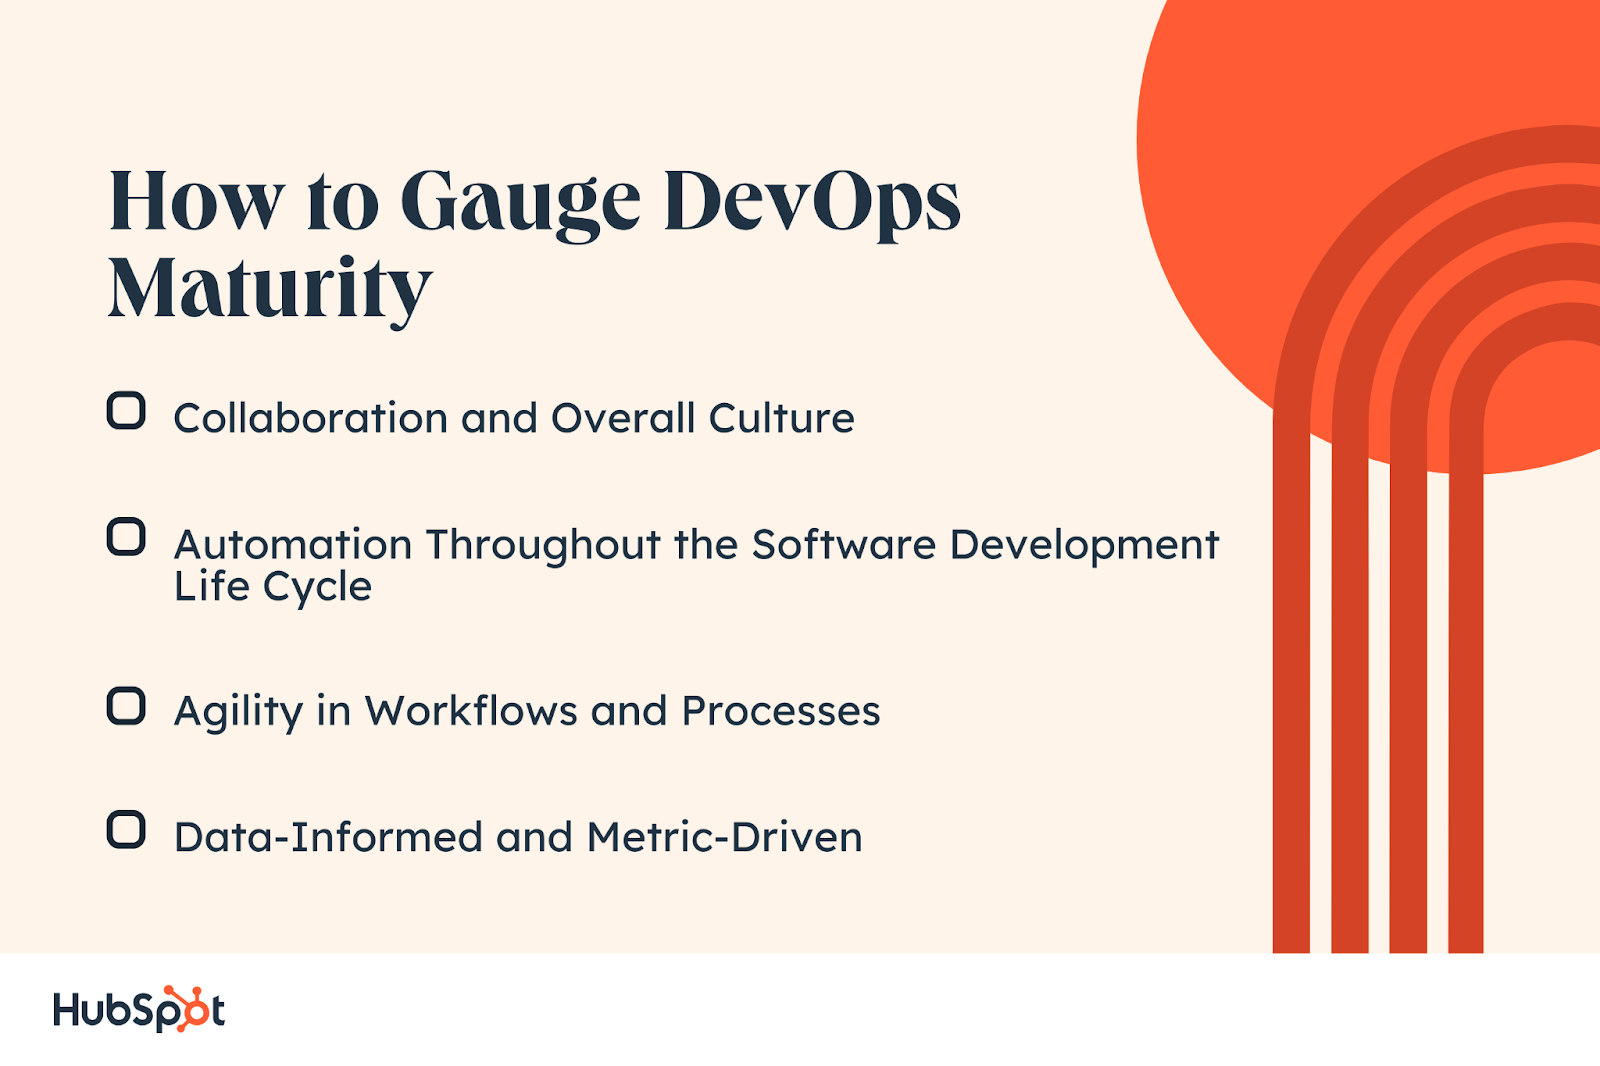 How to Gauge DevOps Maturity. Automation Throughout the Software Development Life Cycle. Agility in Workflows and Processes. Data-Informed and Metric-Driven. Collaboration and Overall Culture